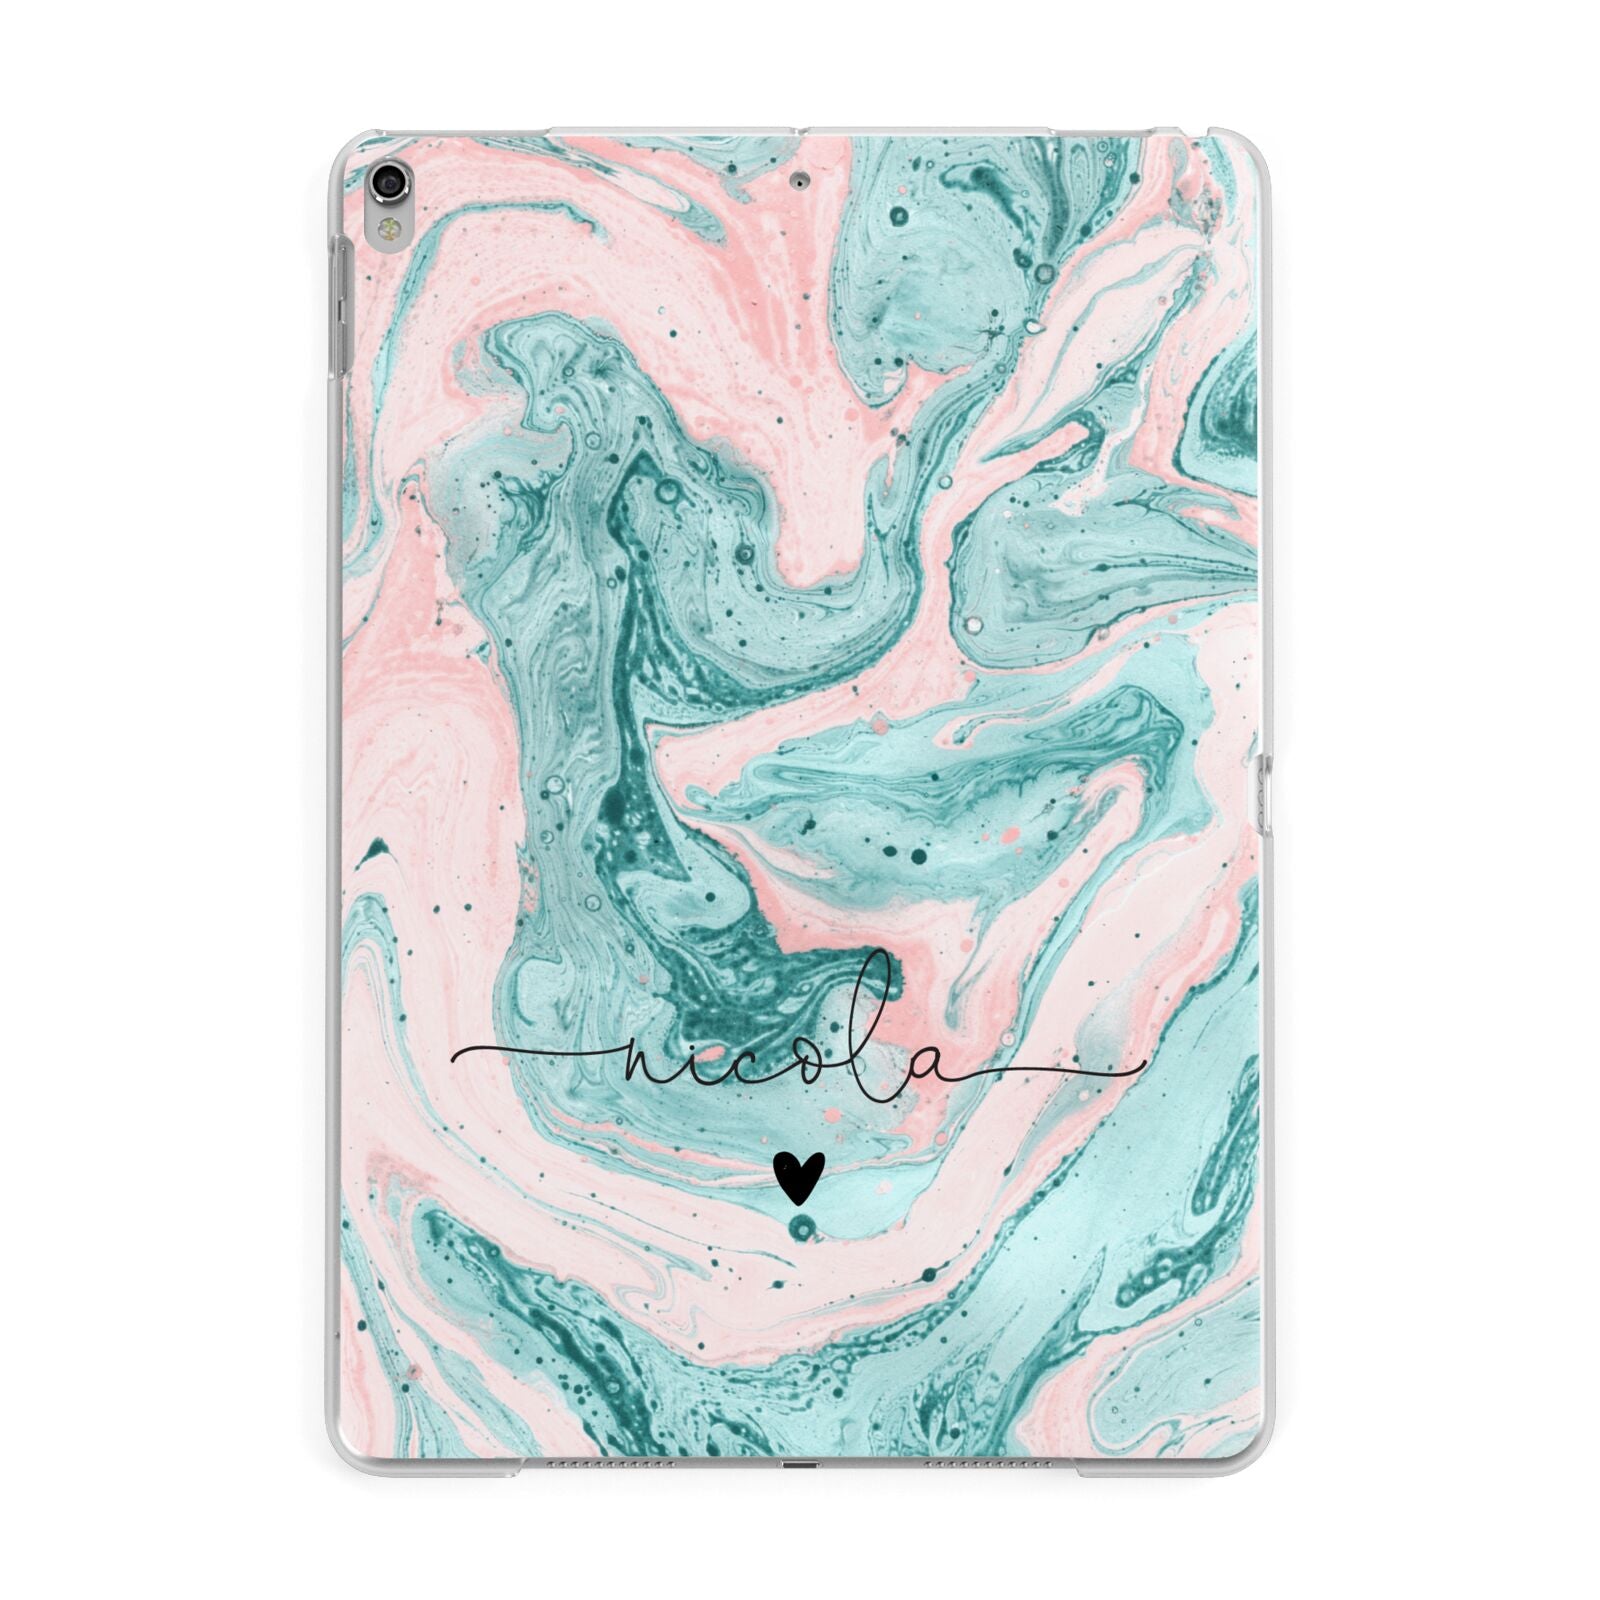 Personalised Name Green Swirl Marble Apple iPad Silver Case